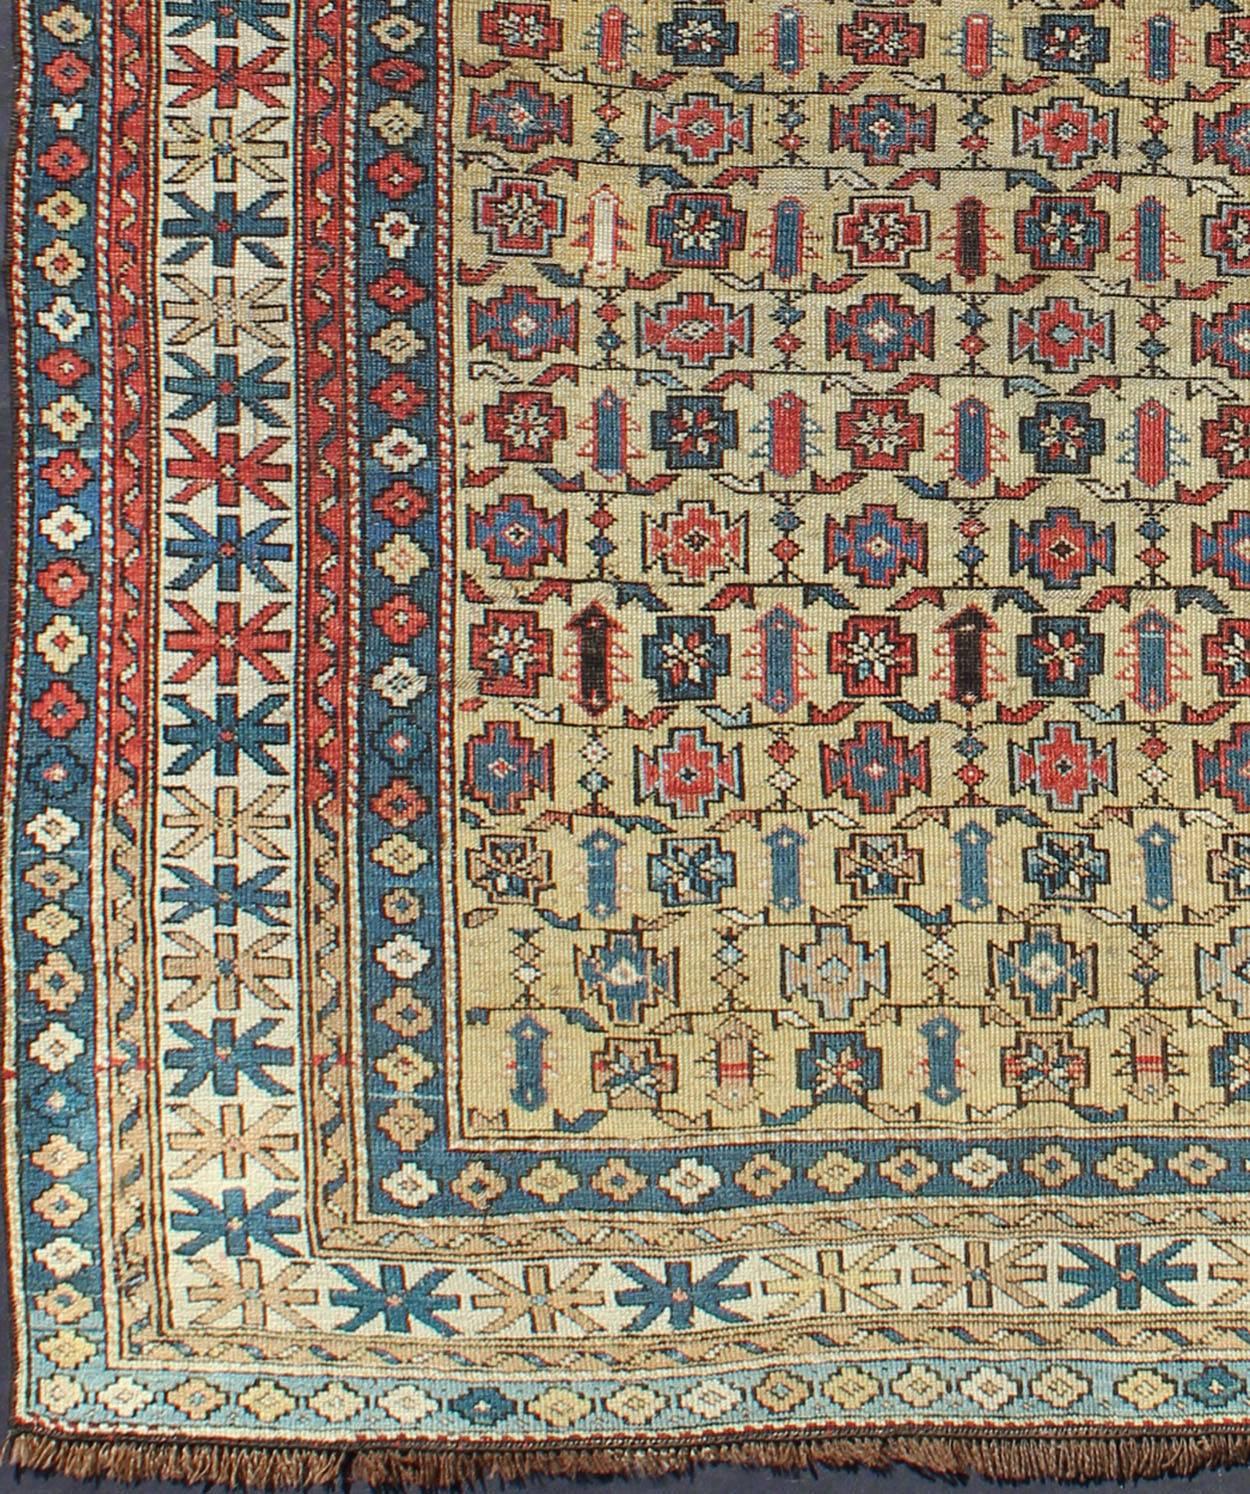 Antique Kuba rug with all-over geometric ornament design in multi-colors. Keivan Woven Arts /  rug S12-0617, country of origin / type: Caucasus / Kazak, circa 1890
Measures: 4'1 x 4'9.
This Kuba rug from the southern Caucasus region features many